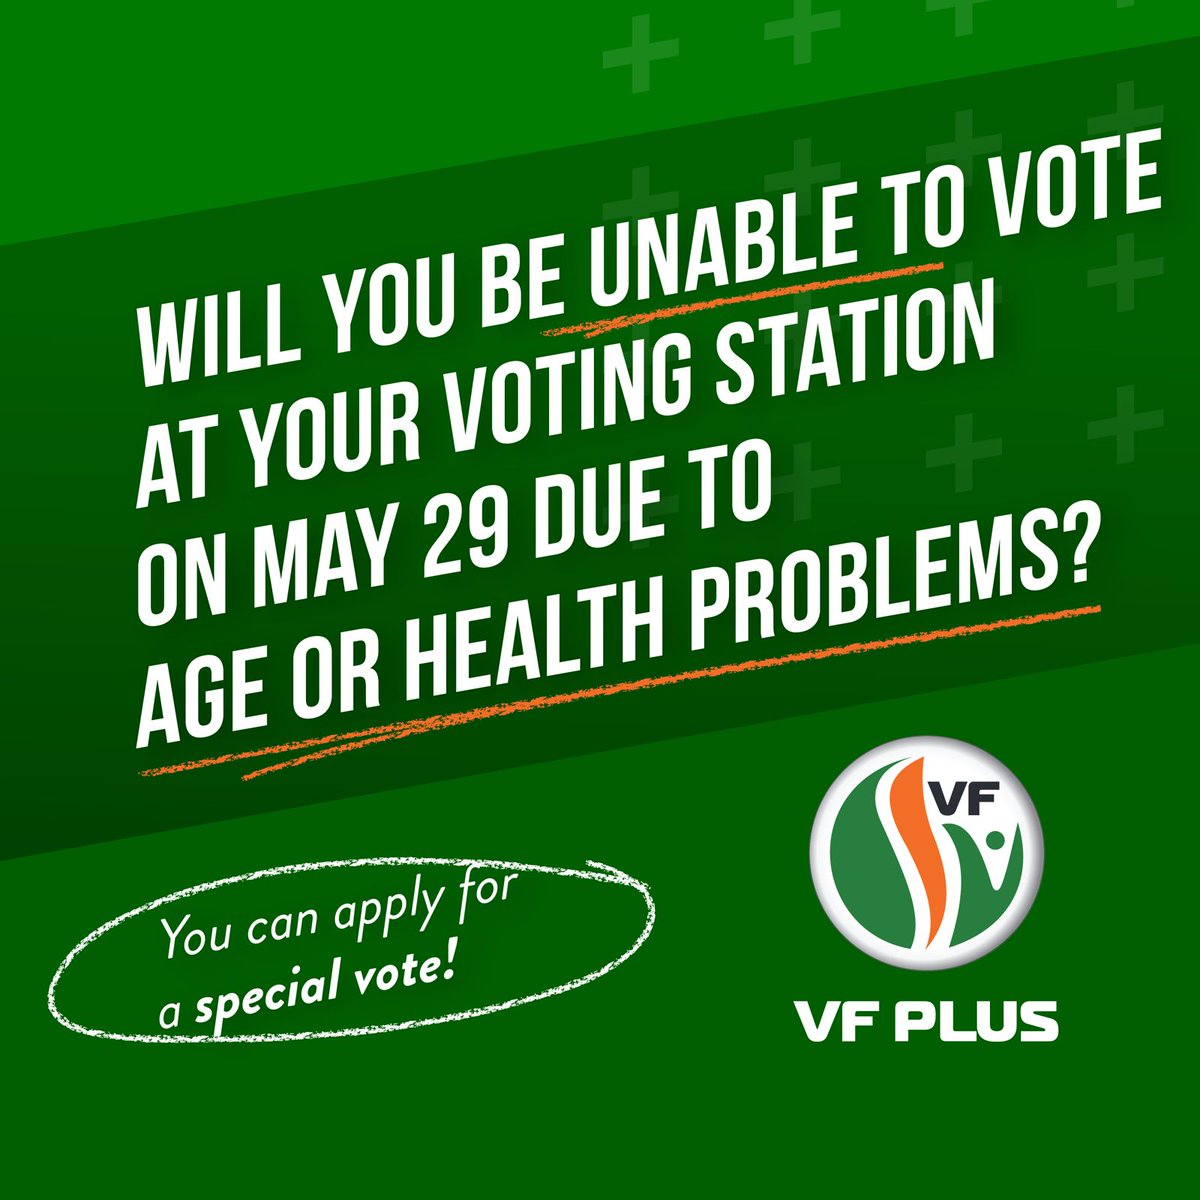 If you cannot visit your voting station due to age or health problems, you can apply to vote at home. The IEC will visit you at your home, home for the elderly or hospital on 27 or 28 May to enable you to cast your vote. Applications close 3 May 2024. We can help you…